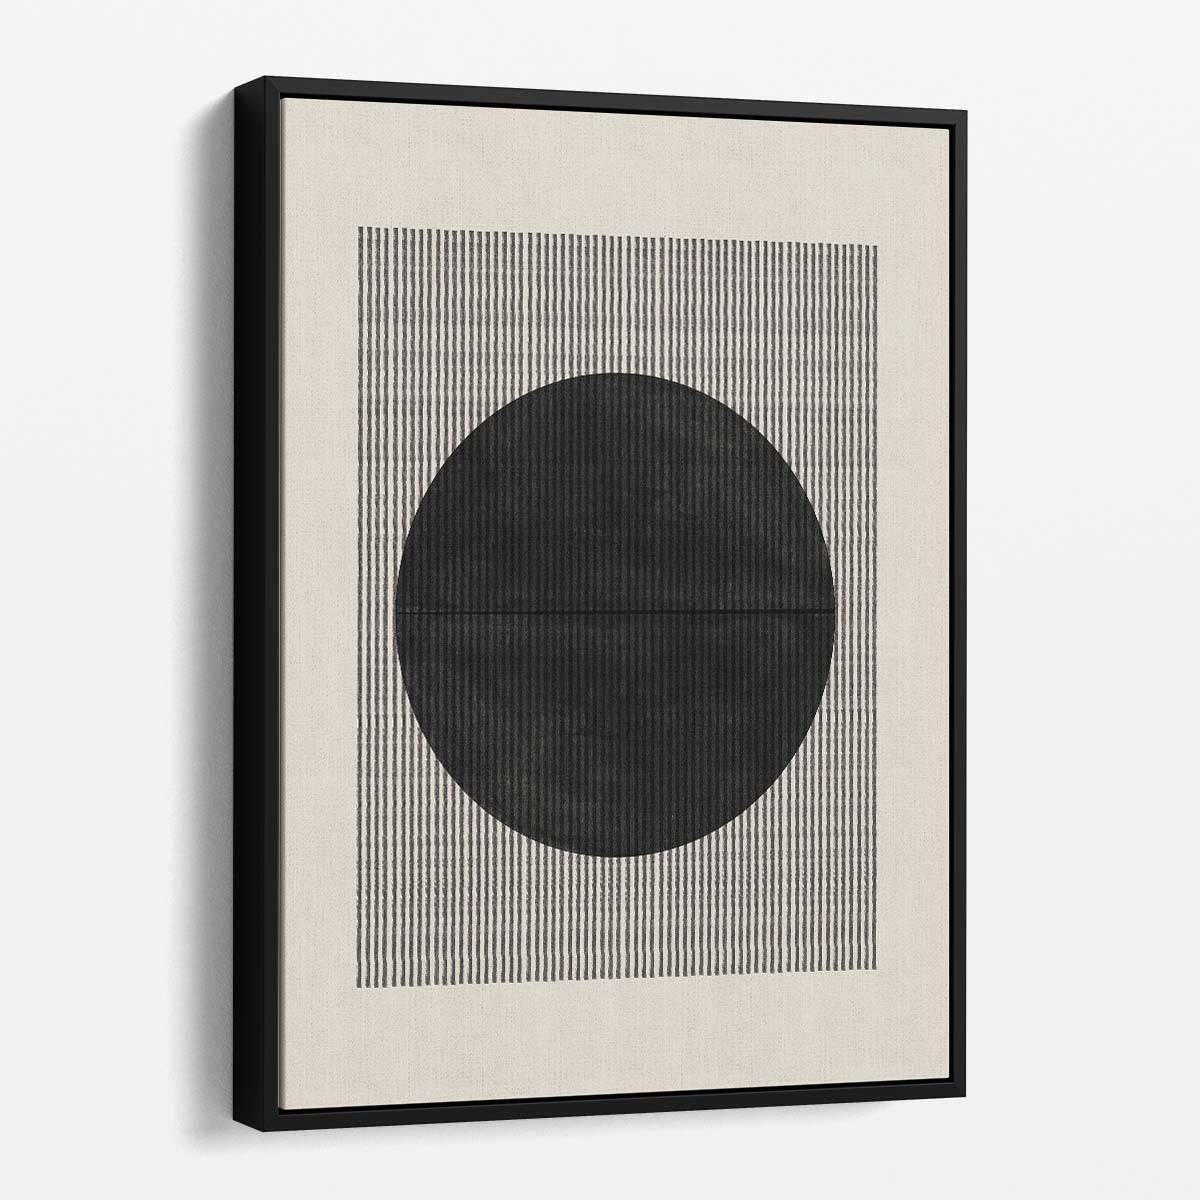 Mid-Century Geometric Illustration Artwork, 'BaB No7' with Beige Abstract Circle Design by Luxuriance Designs, made in USA